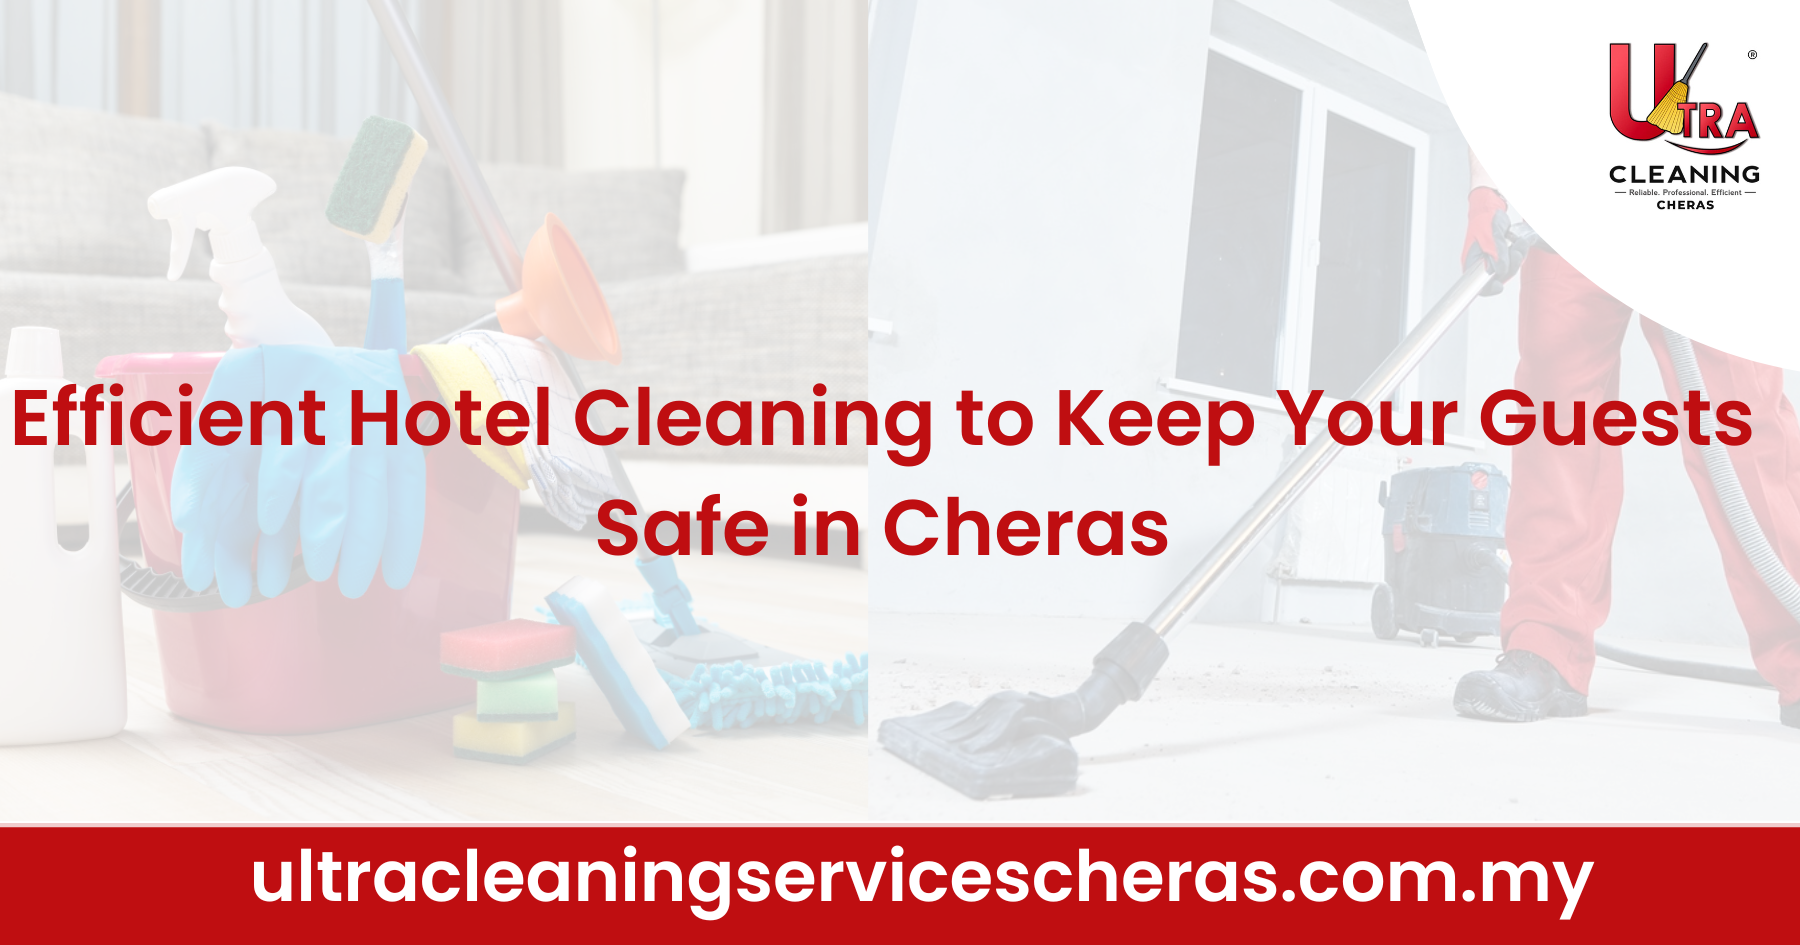 Efficient Hotel Cleaning to Keep Your Guests Safe in Cheras